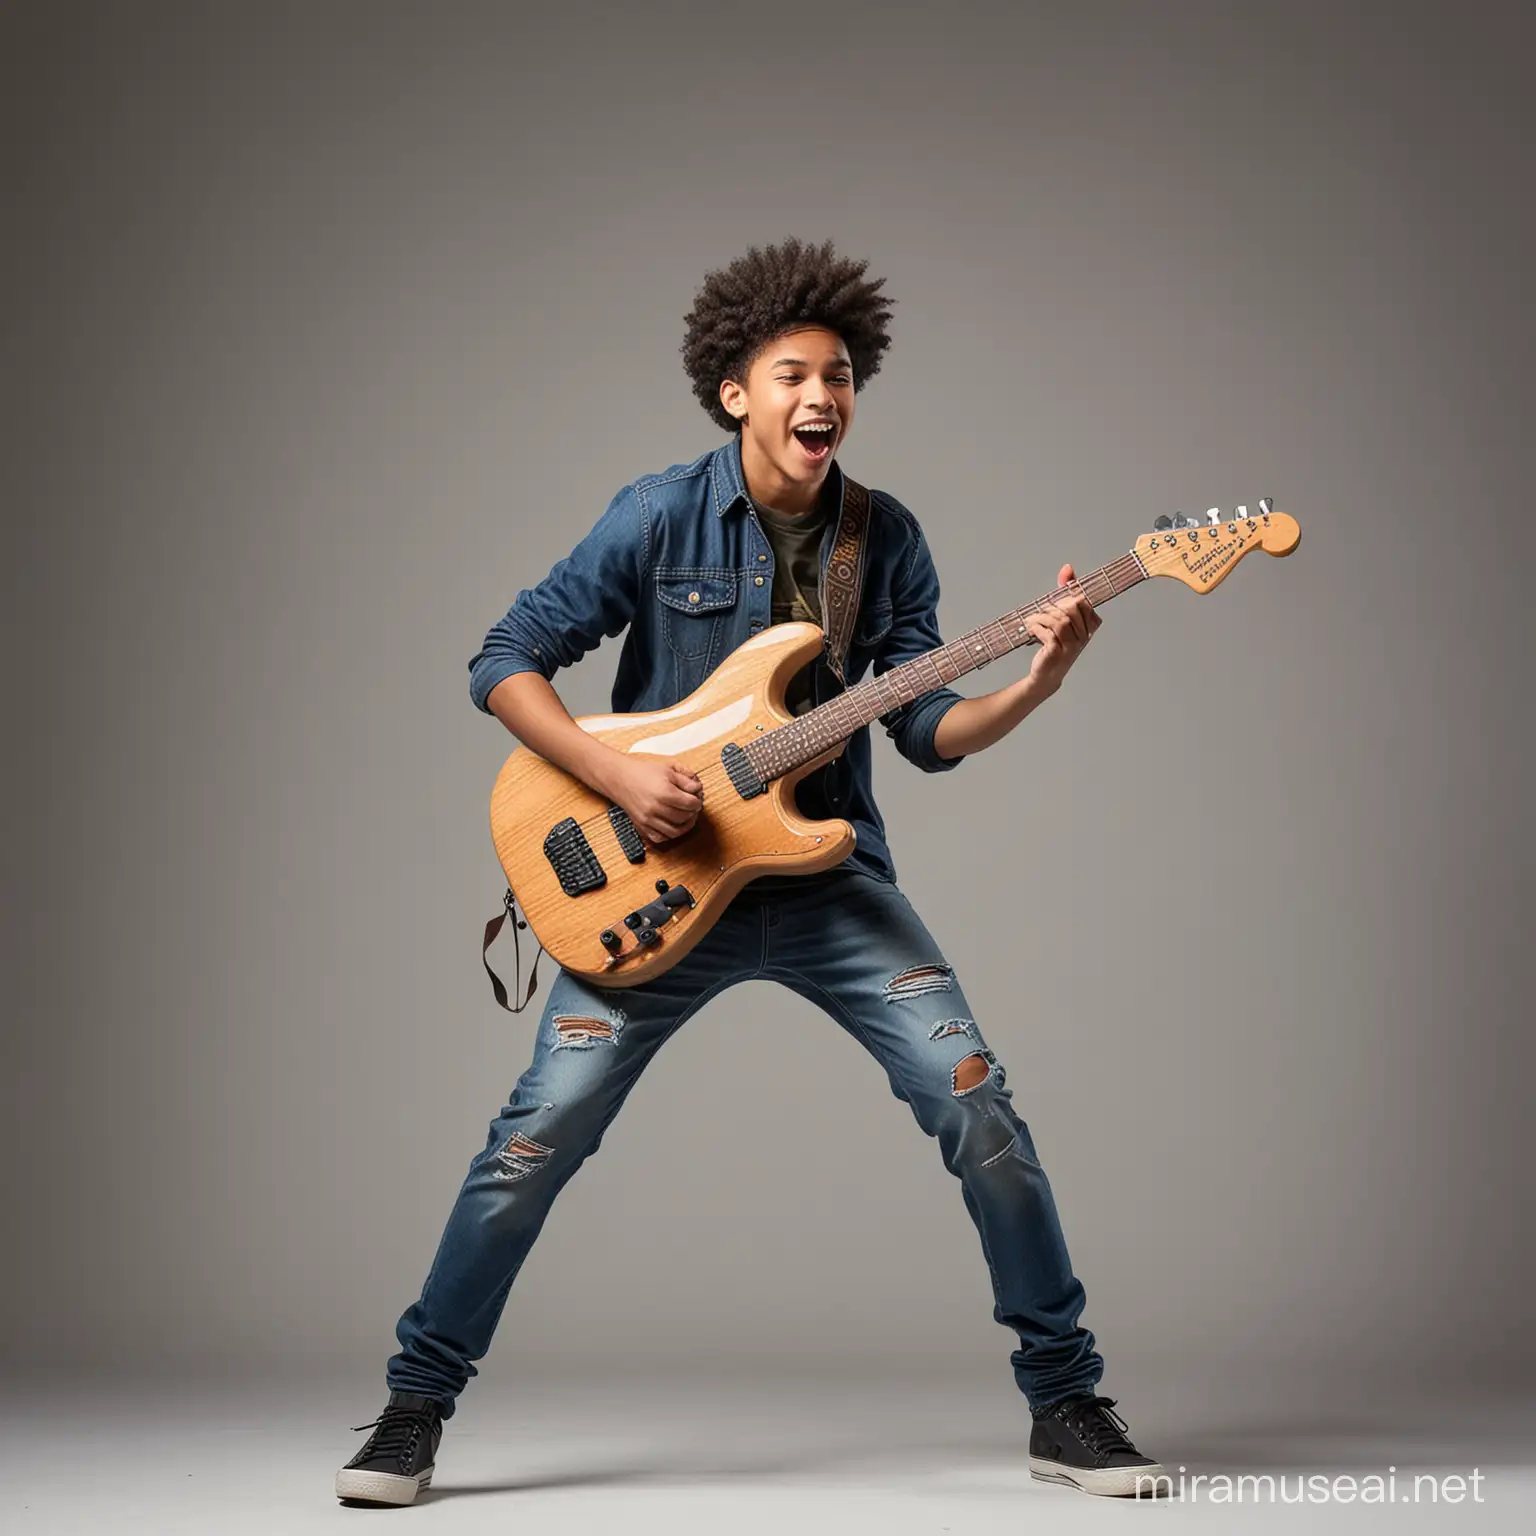 Energetic Mixed Race Teenager Jumping with Guitar